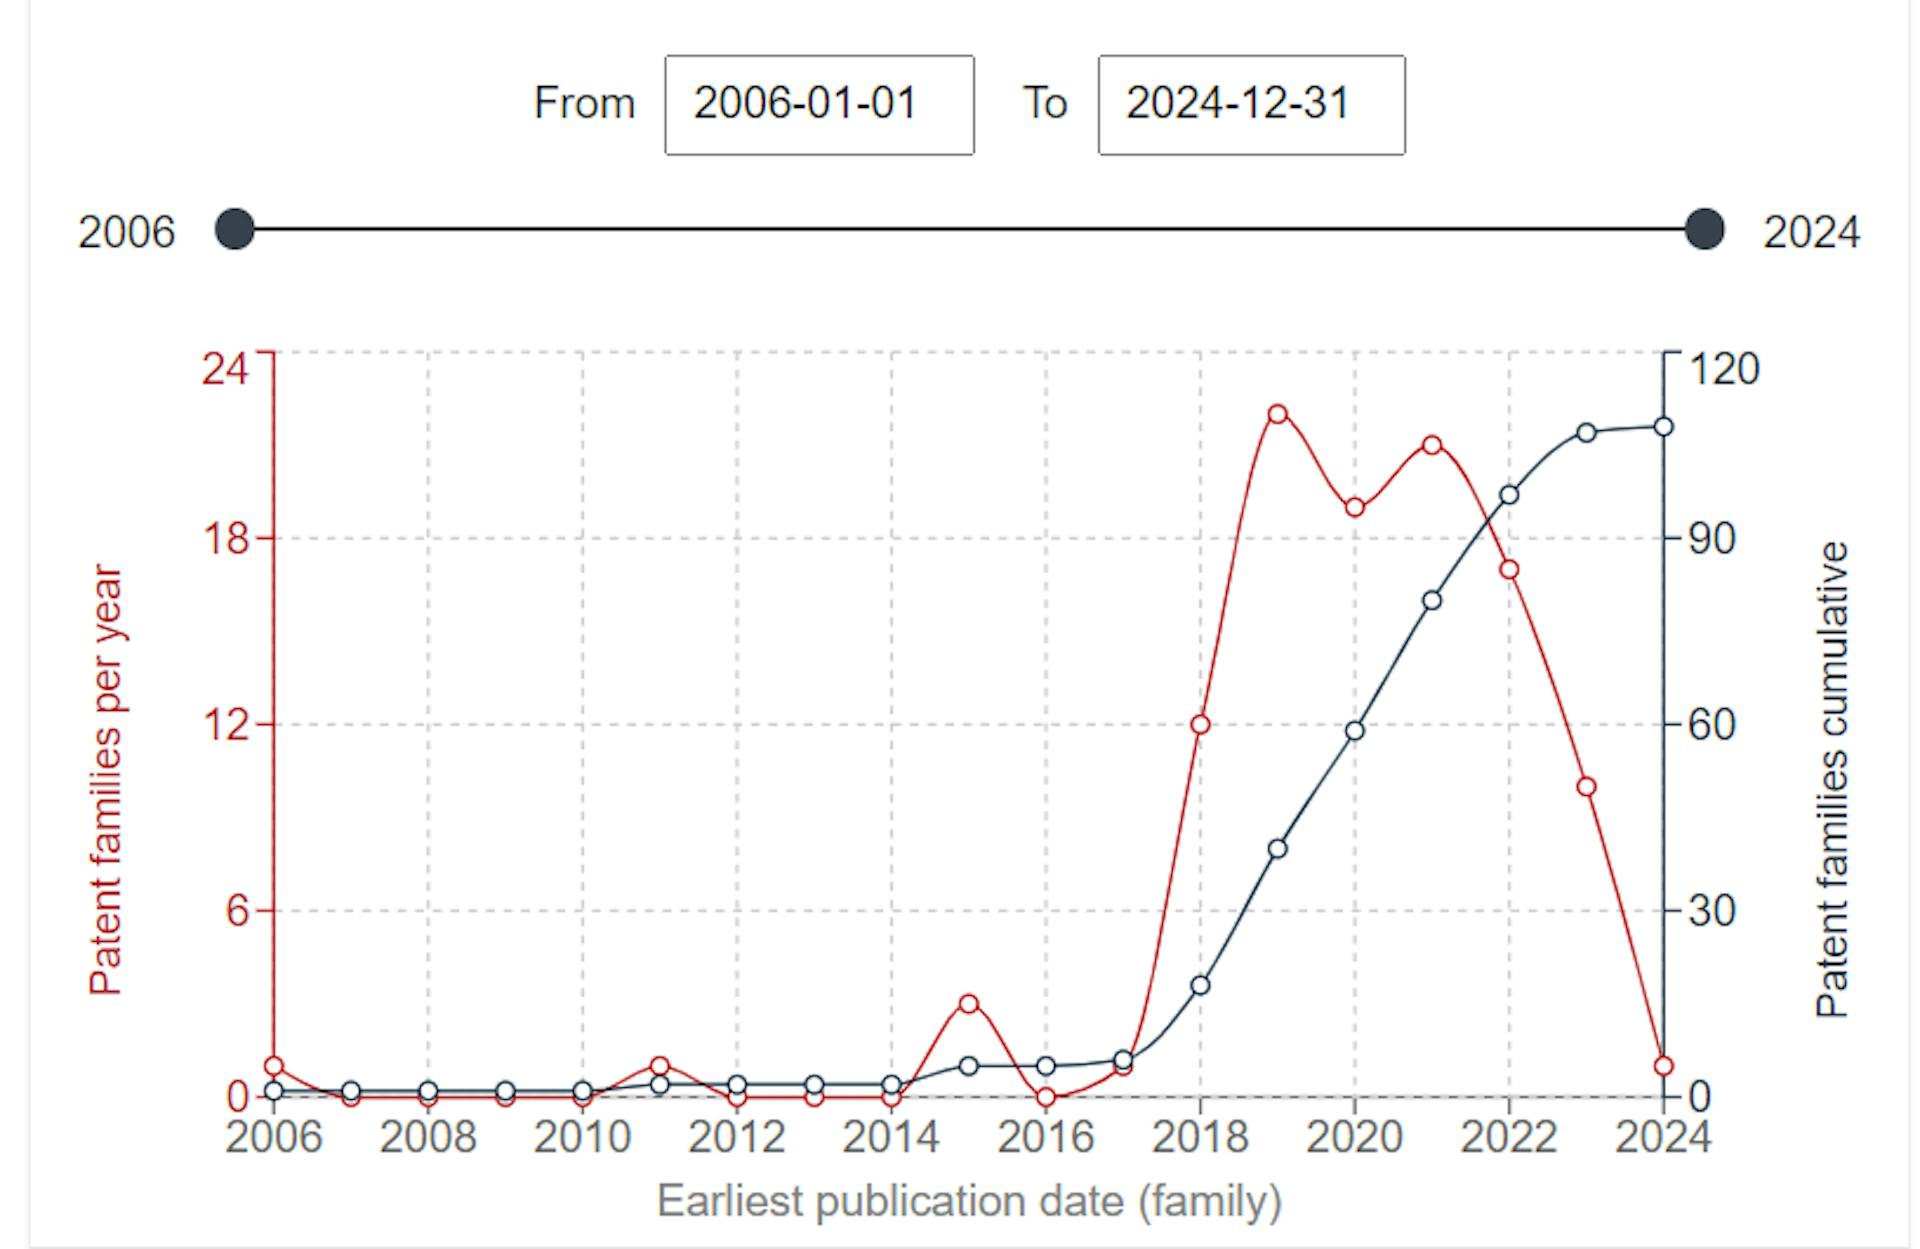 Tectus: the red line shows the number of priority applications, the black line – the number of all patent publications  